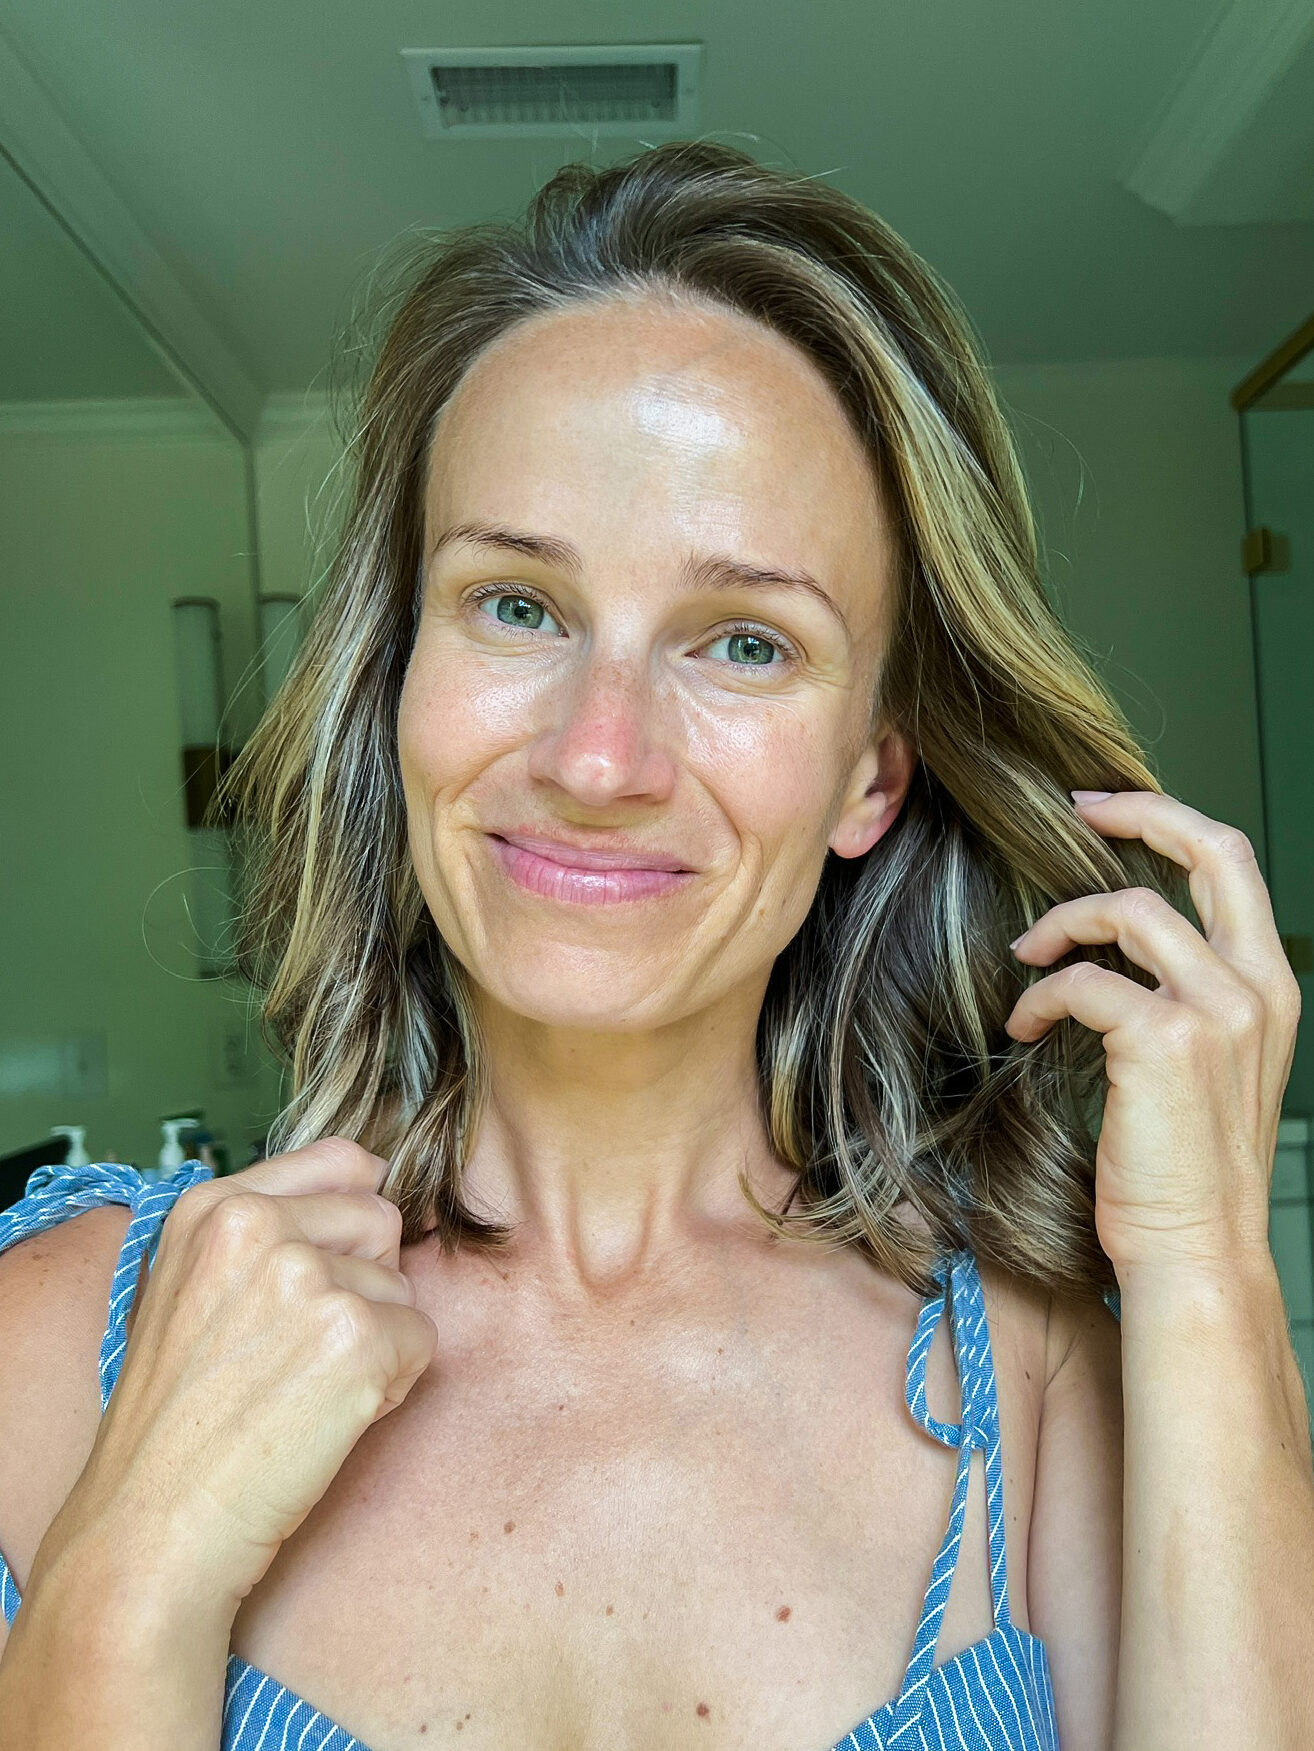 TeriLyn Adams showing her face after using the Beautycounter Overnight Resurfacing Peel